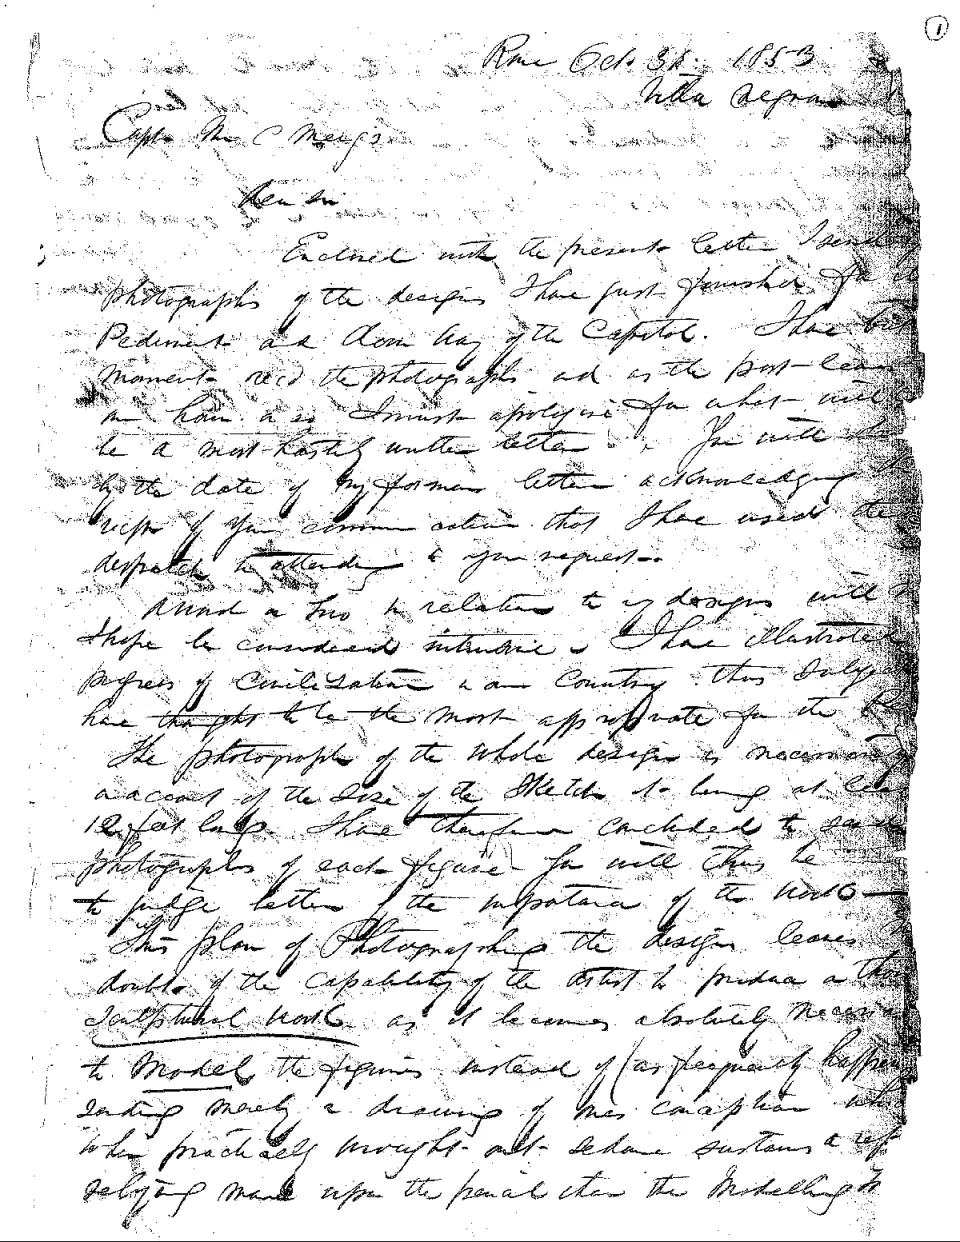 First page of the letter Thomas Crawford wrote to Captain Montgomery Meigs about the pediment.